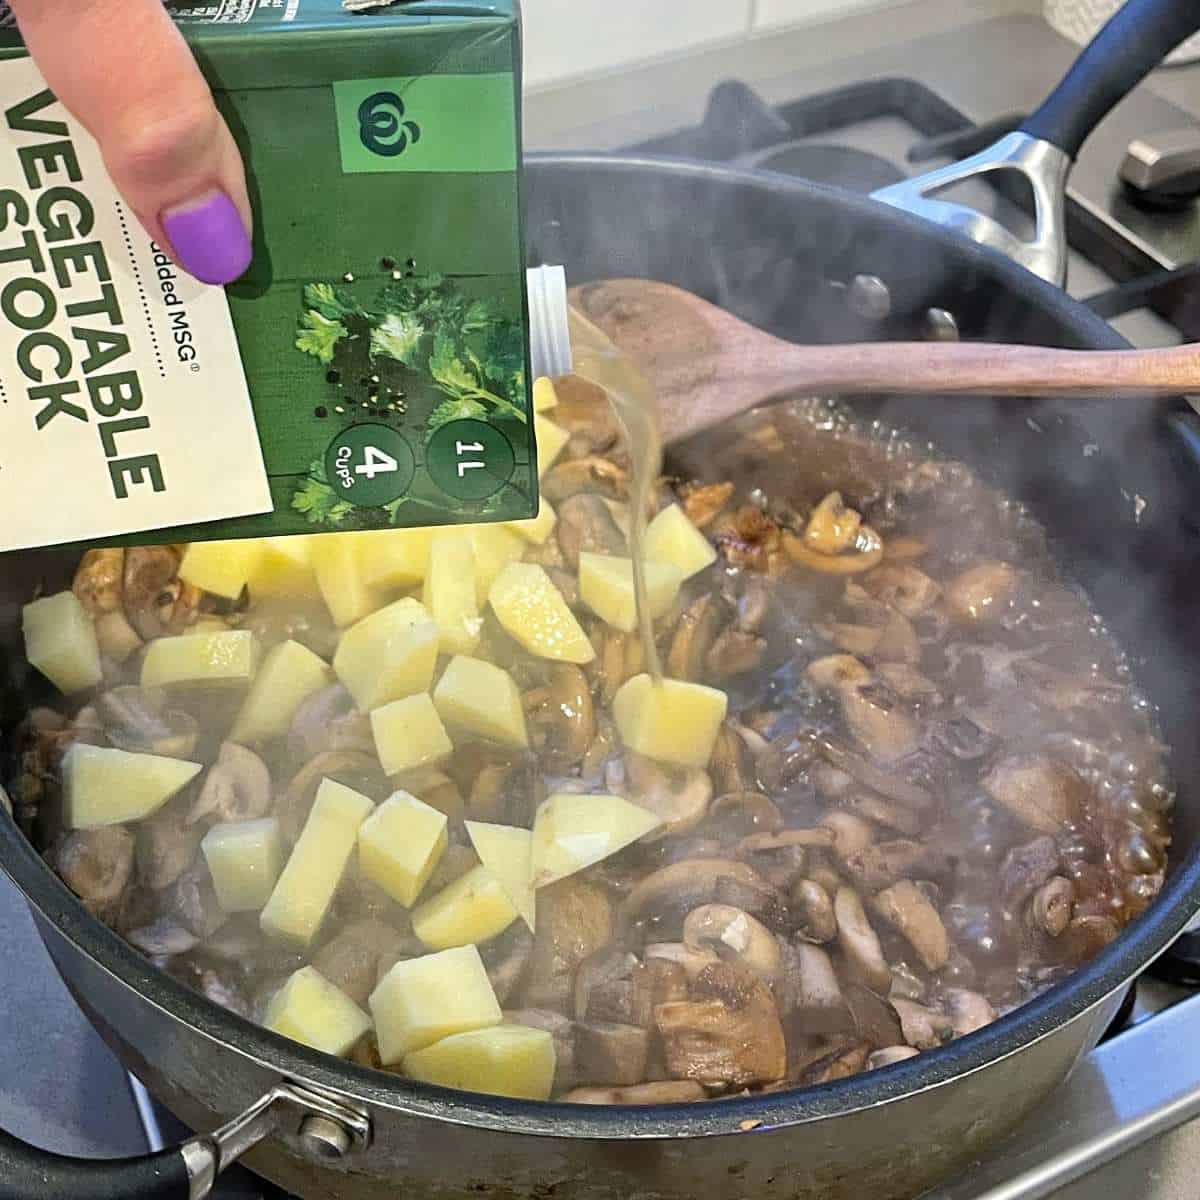 The vegetable stock being added to the sliced mushrooms, garlic, thyme, potatoes and onion in a frypan.